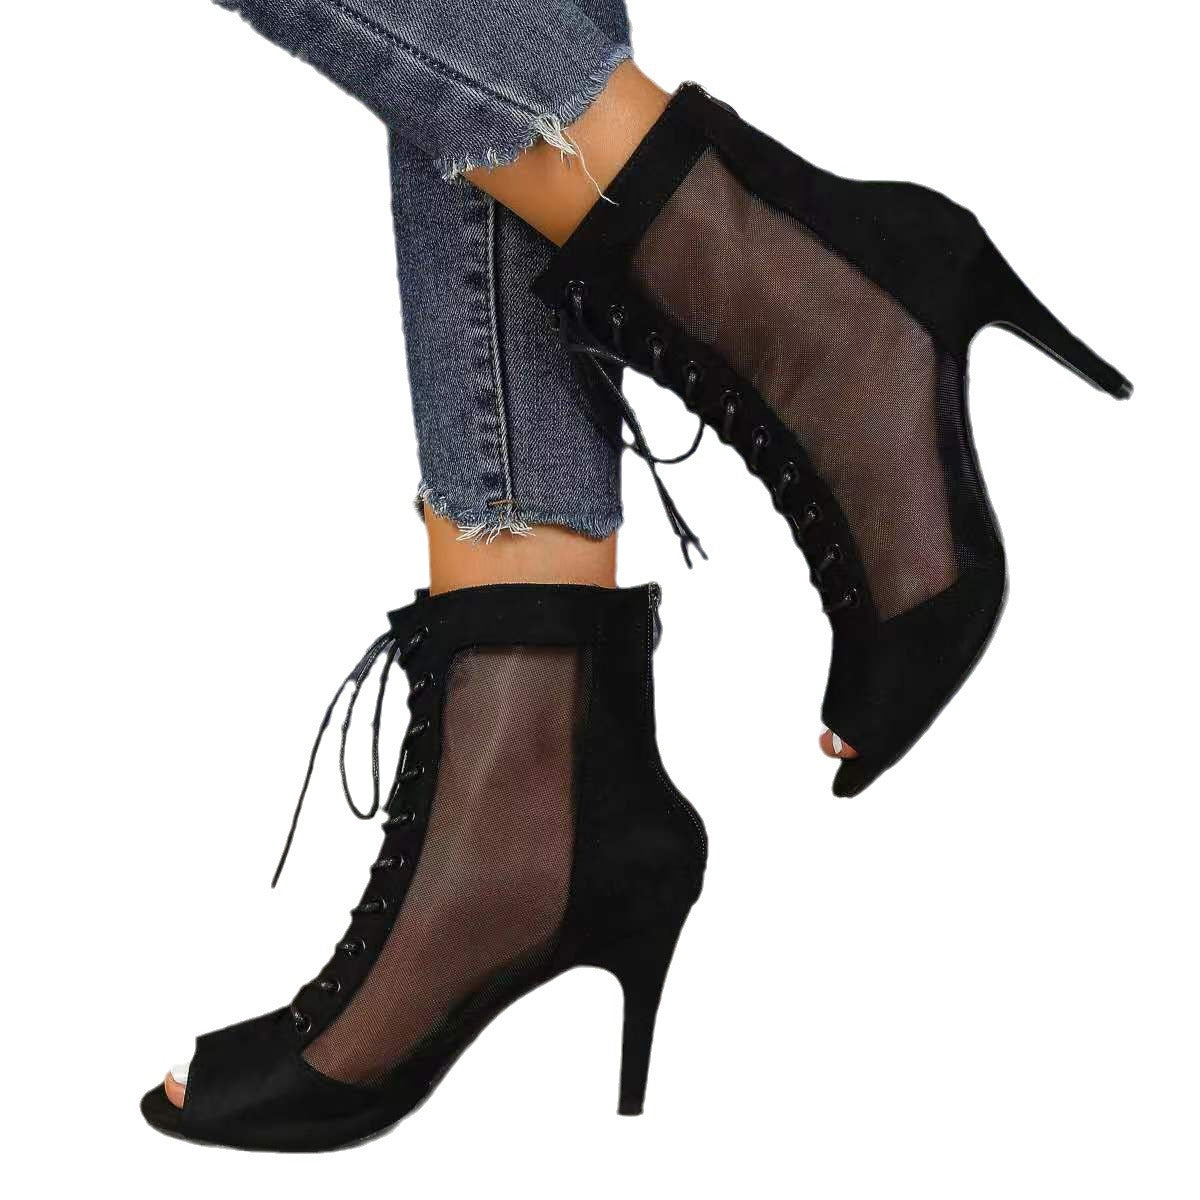 Mesh Fish Mouth Stiletto Heel High Sandal Boots for Women